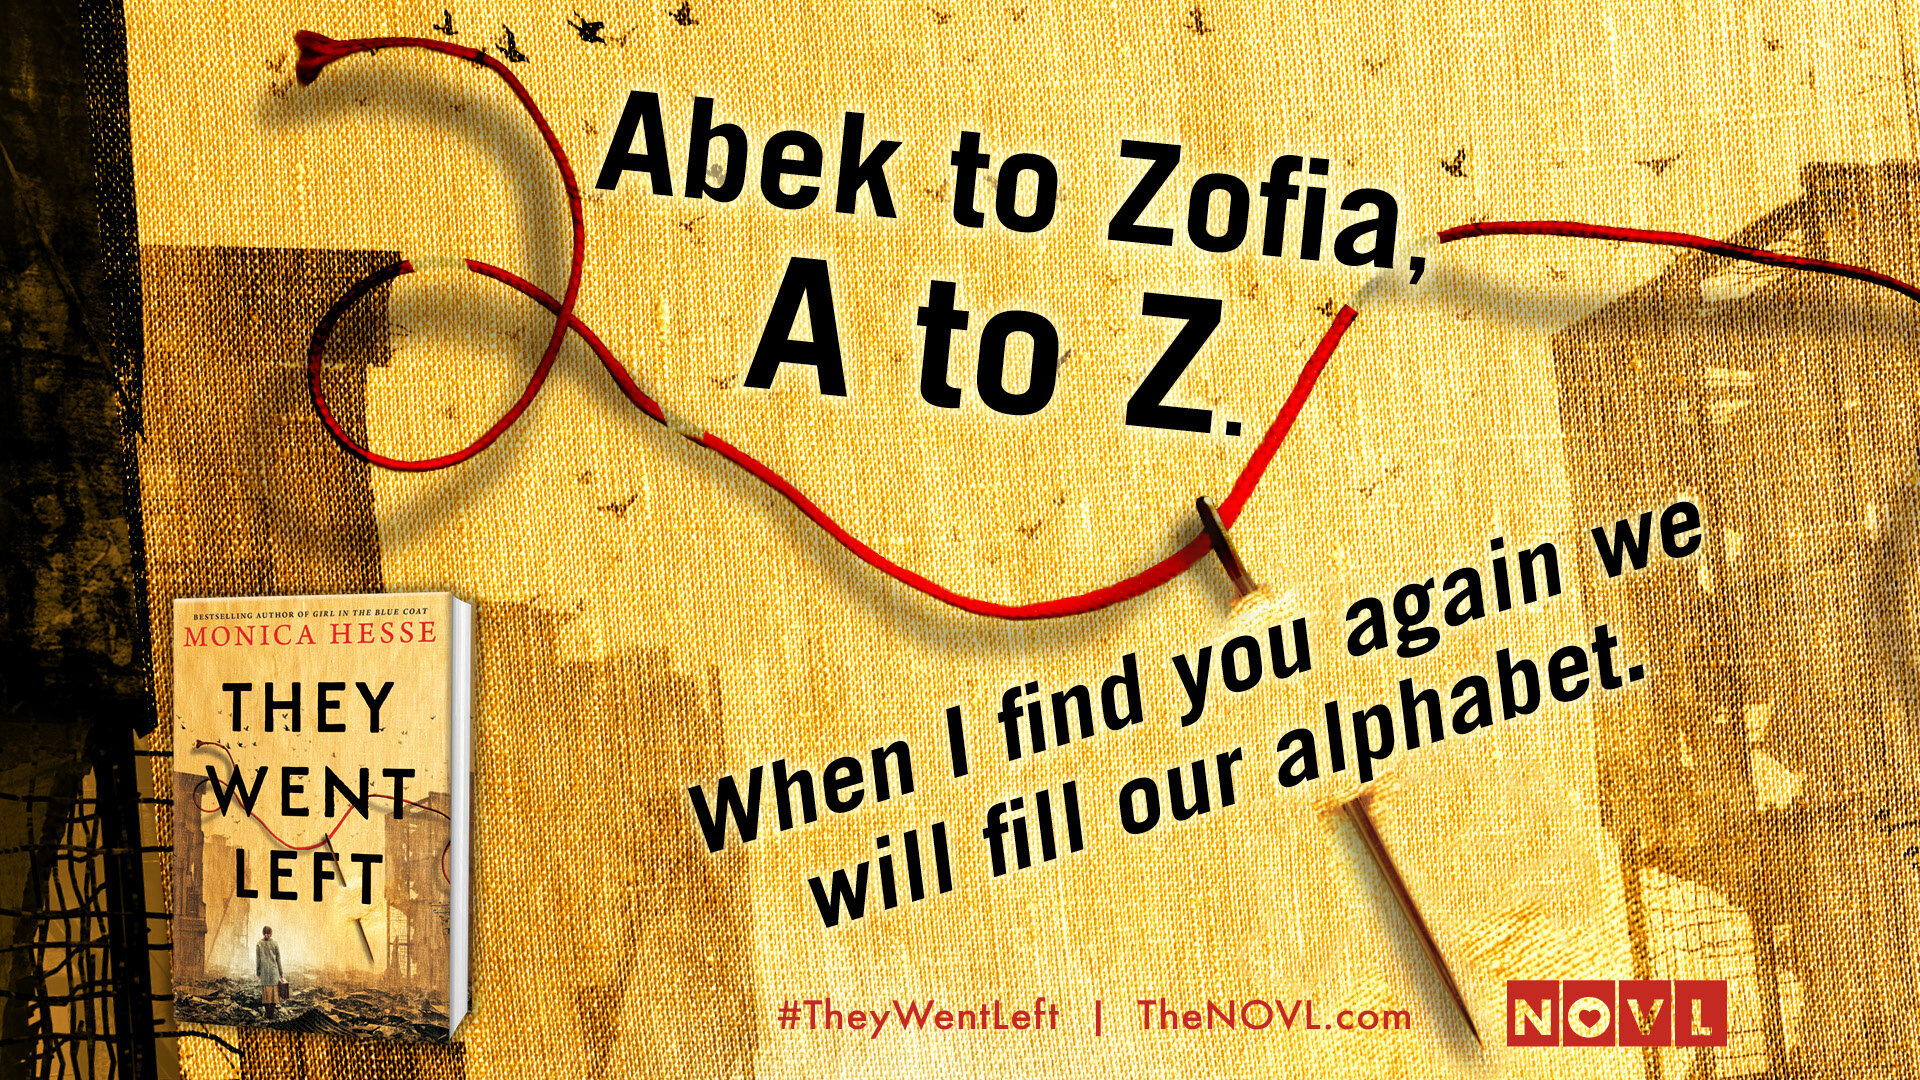 NOVL - Image graphic that reads 'Abek to Zofia, A to Z. When I find you again we will fill our alphabet.'